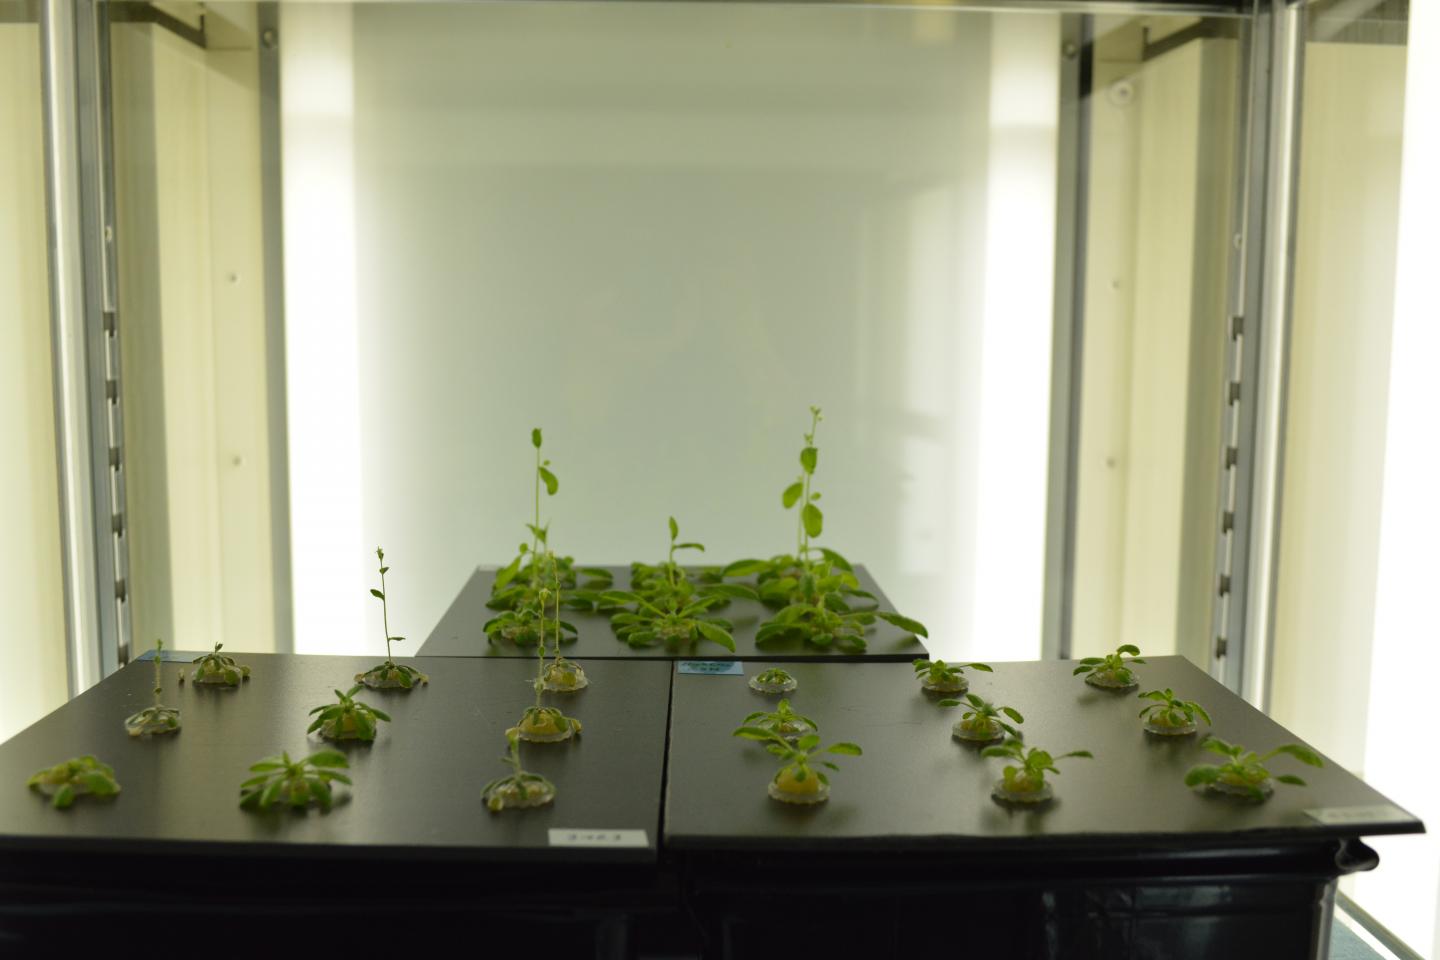 Arabidopsis plants used in the experiments.